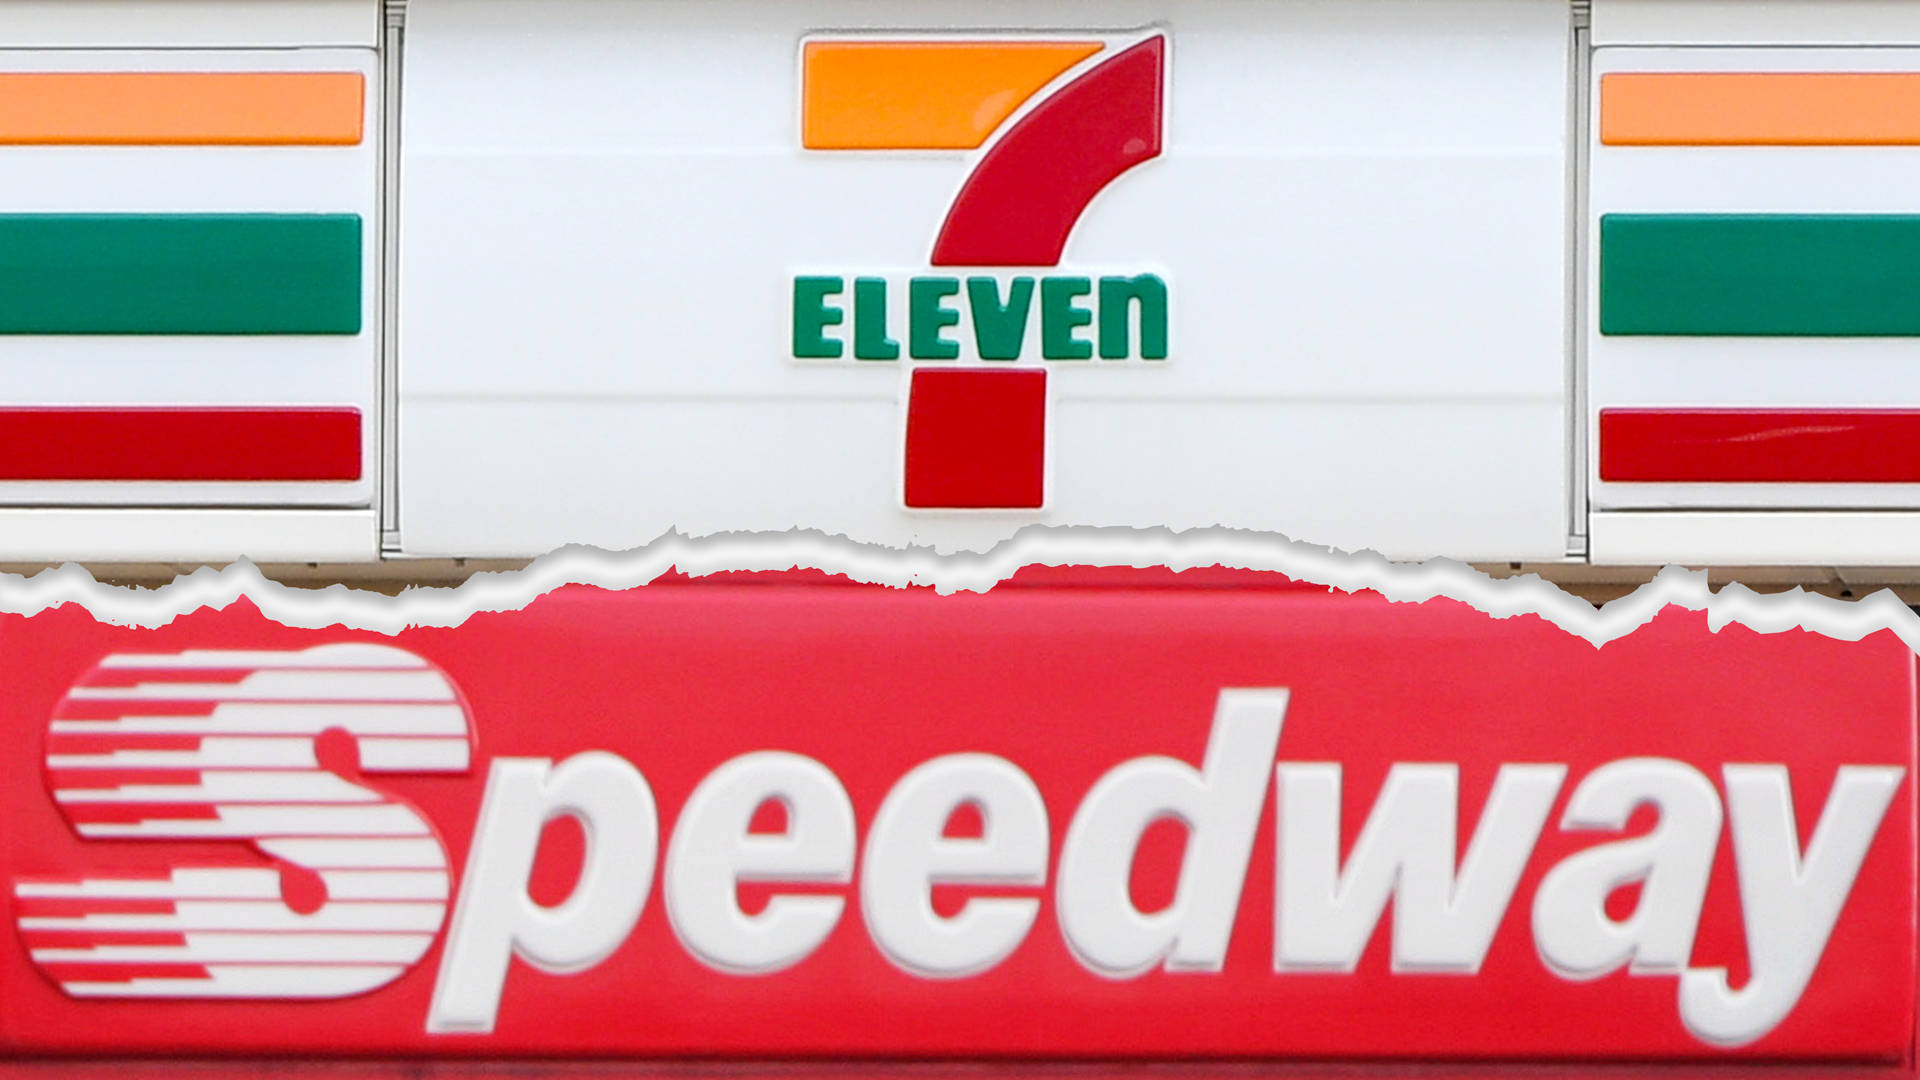 7 Eleven And Speedway Wallpaper